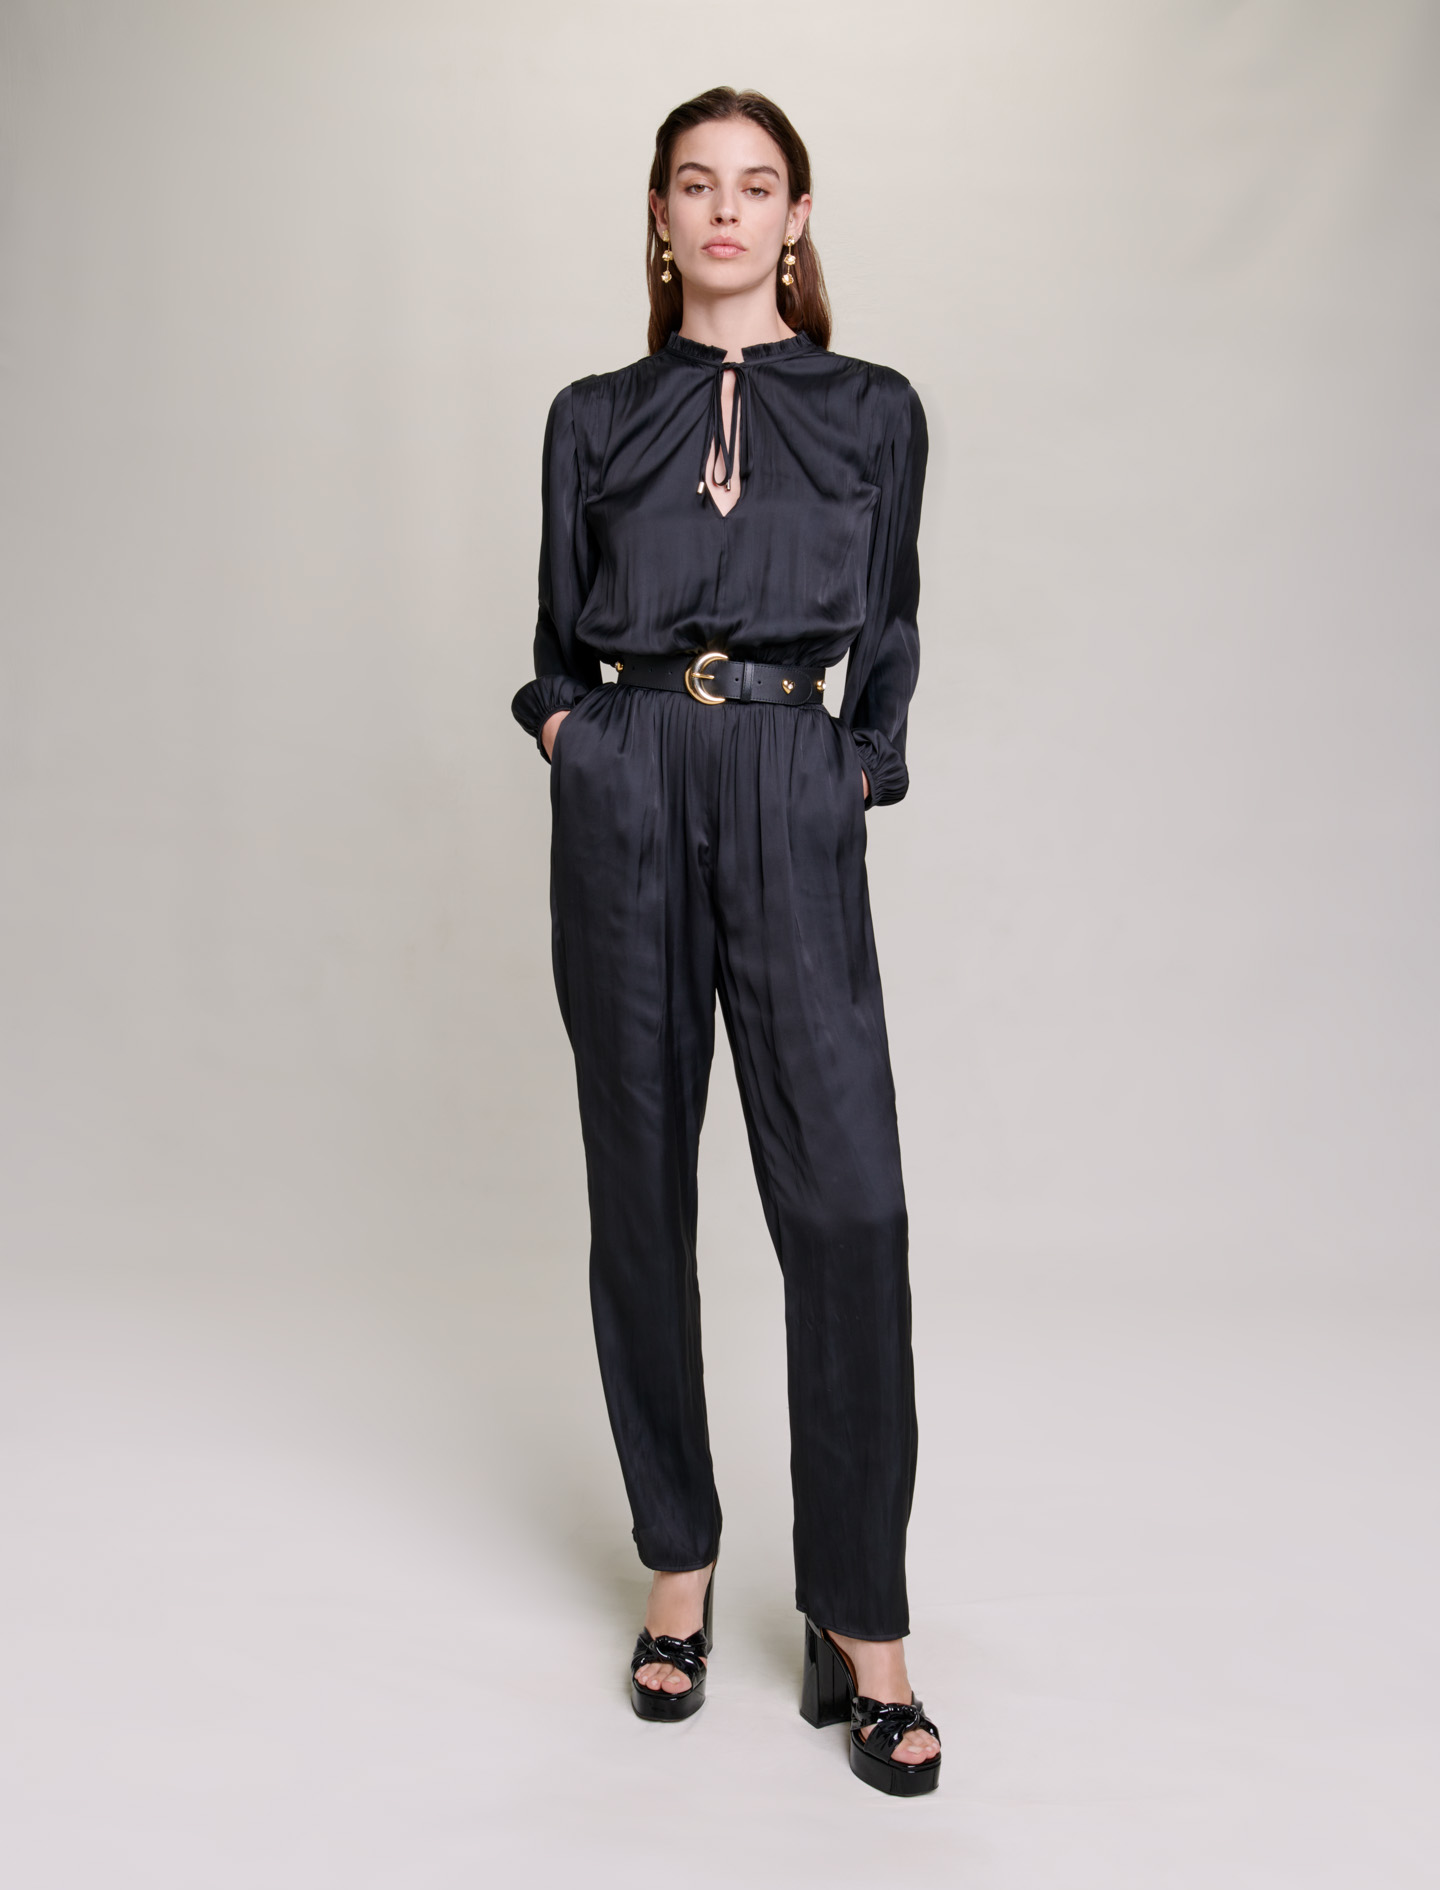 Maje Woman's polyester Long black cinched jumpsuit for Fall/Winter, in color Black / Black